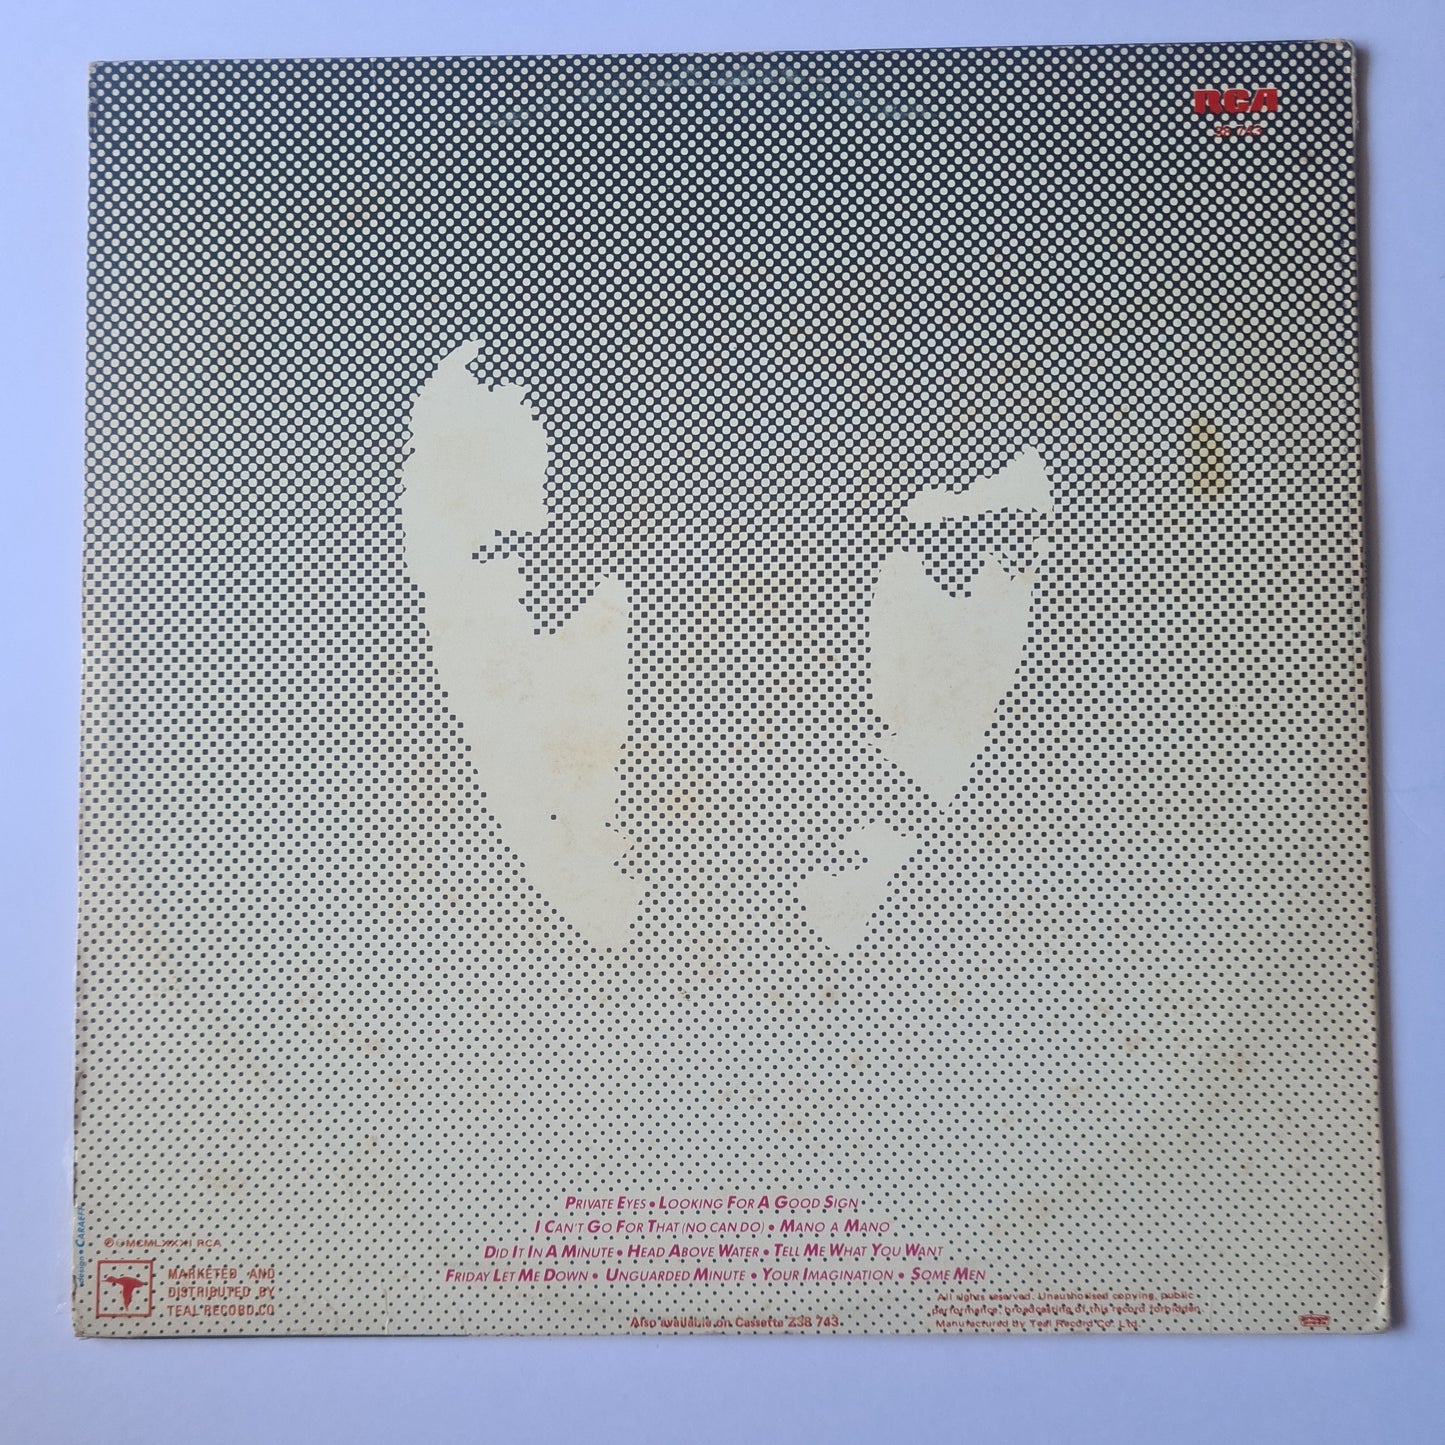 Hall & Oates – Private Eyes - 1981 - Vinyl Record